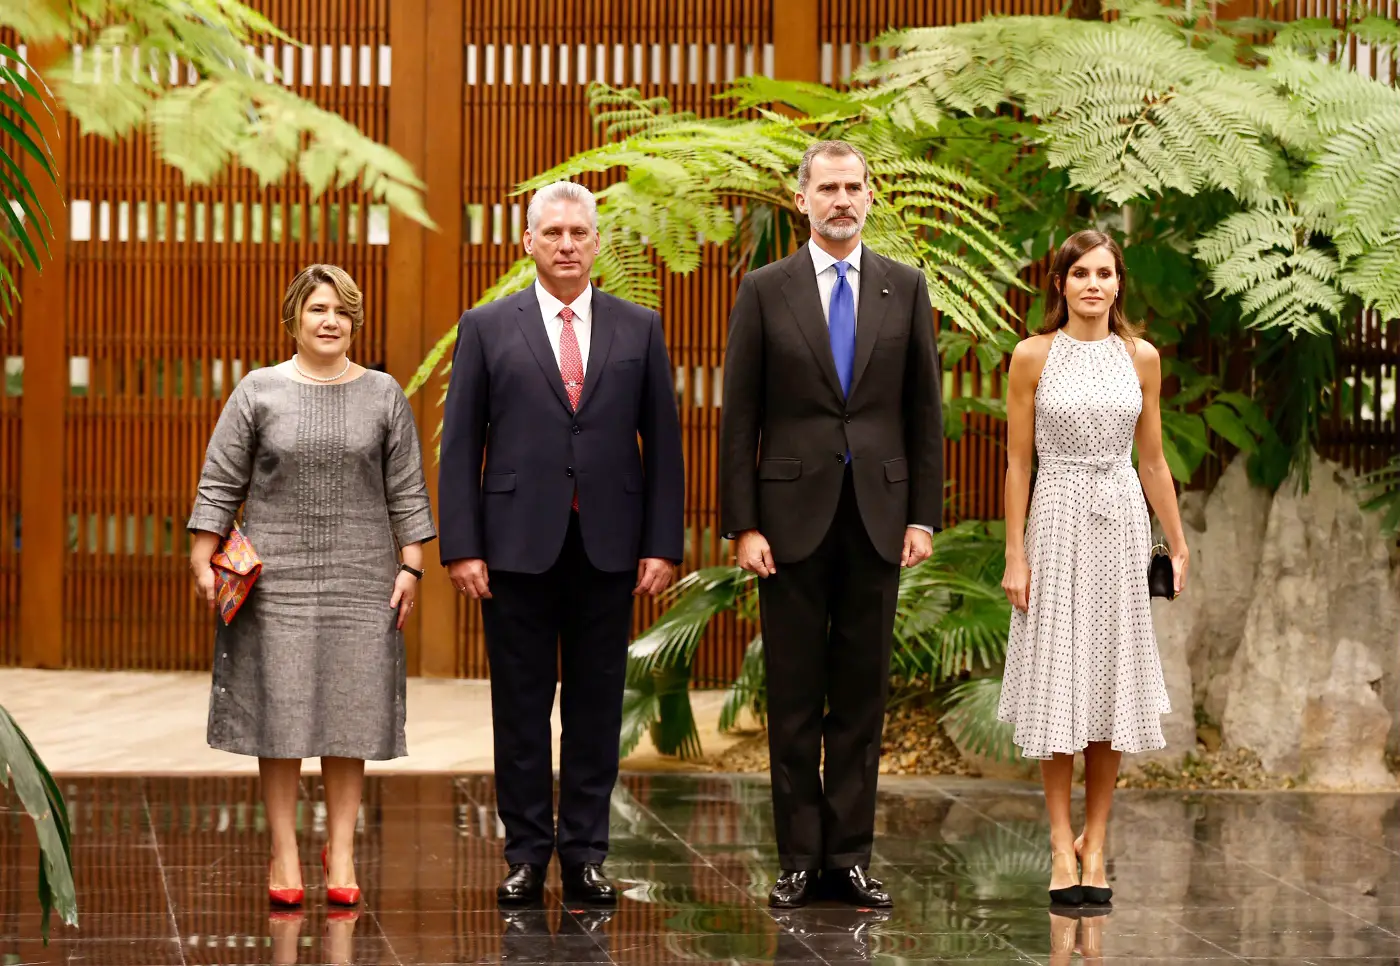 King Felipe and Queen Letizia of Spain in Cuba on State Visit